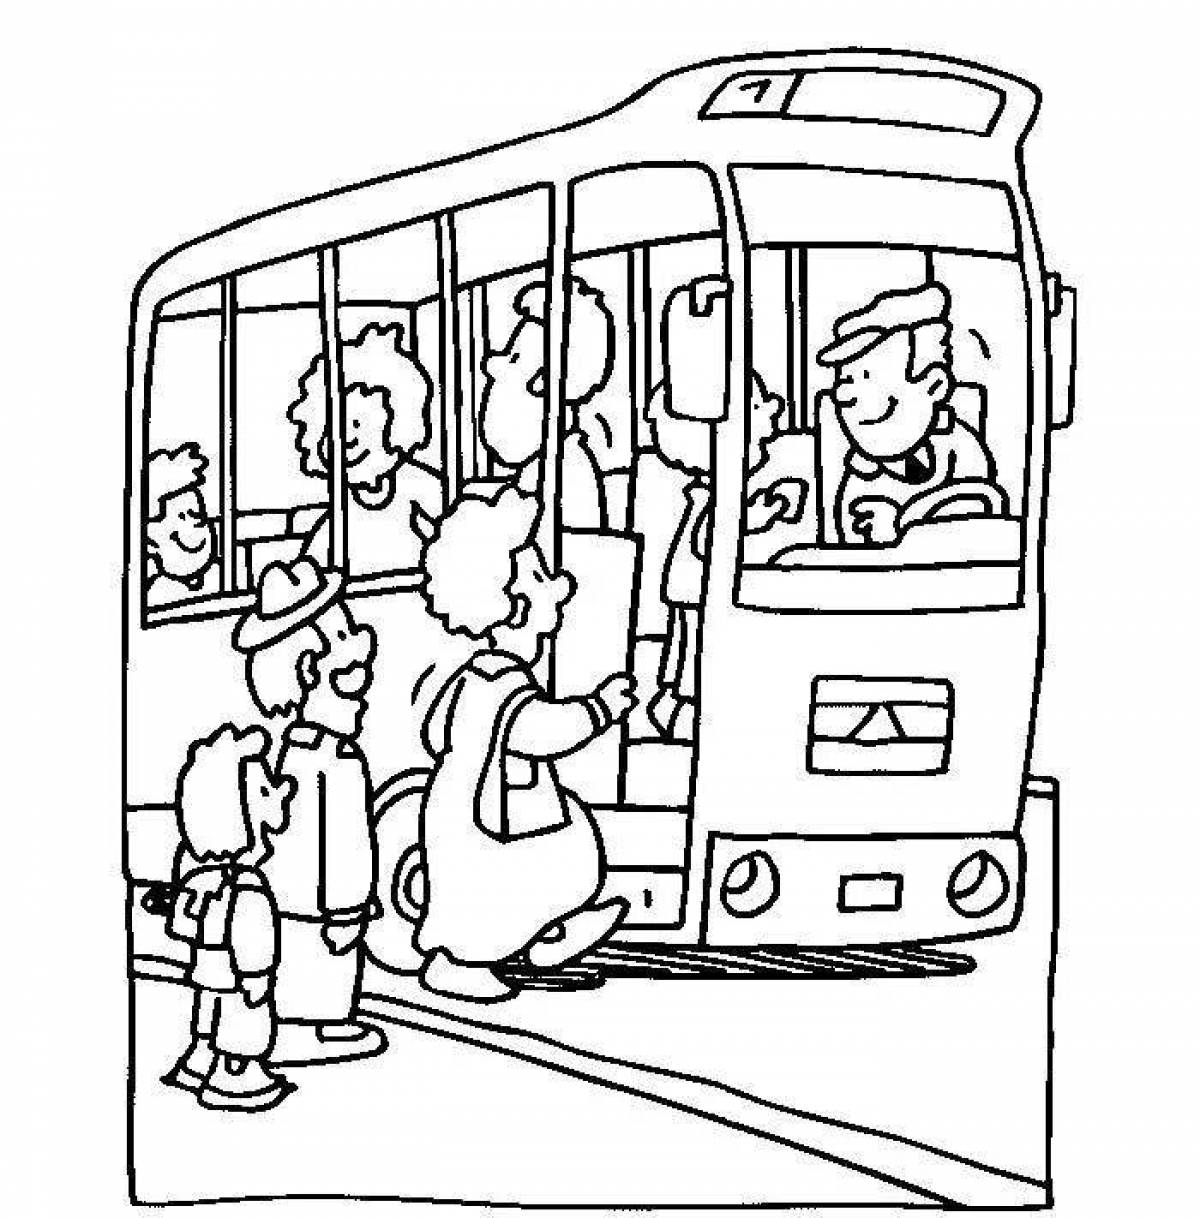 Glorious public transport coloring page